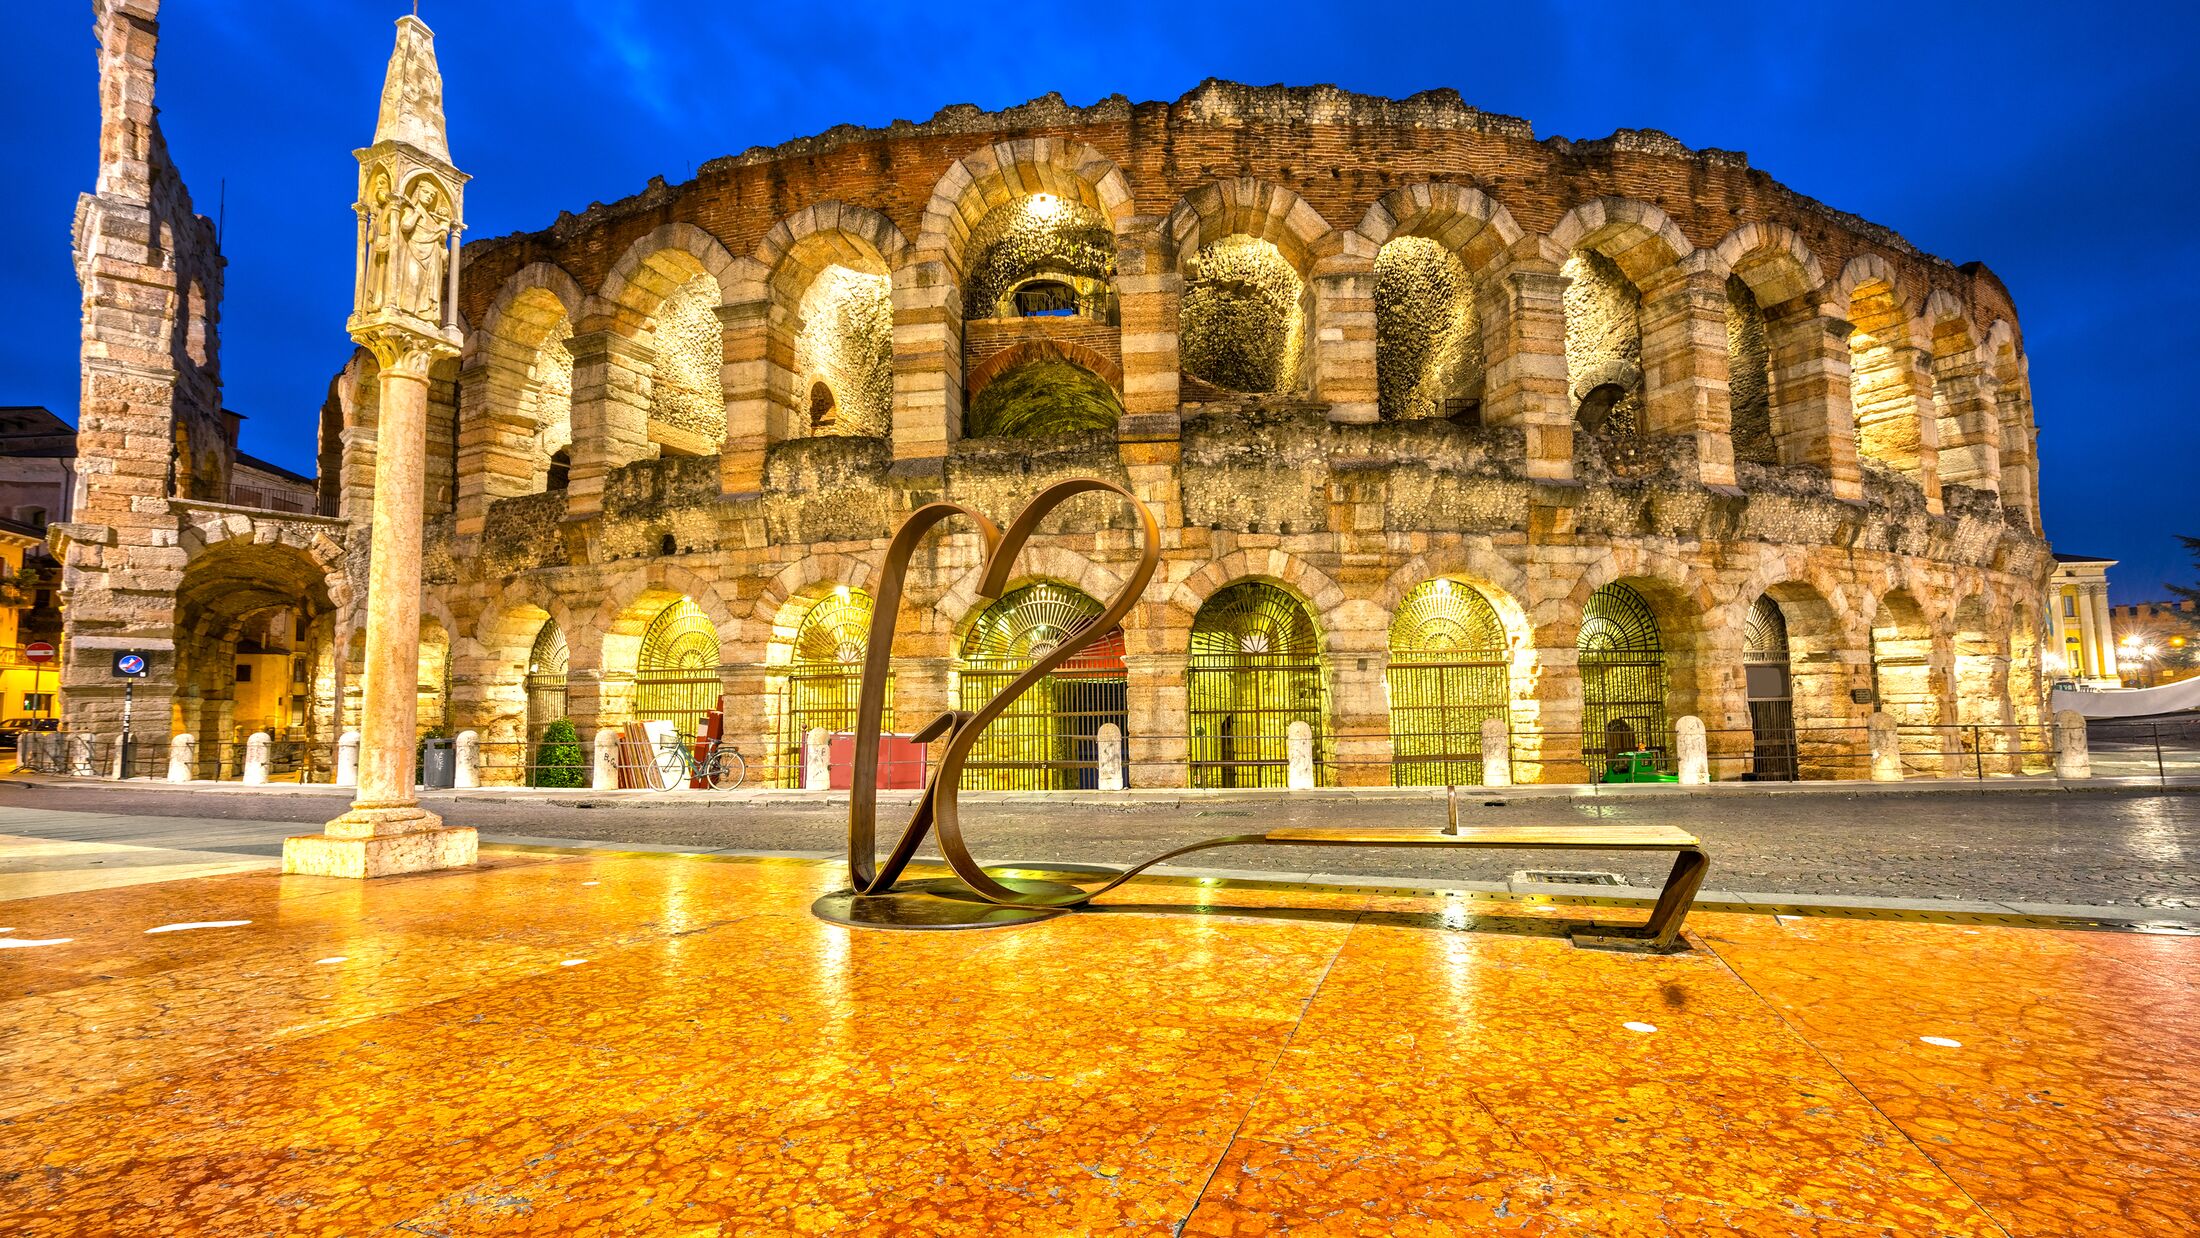 Verona, Italy. Night picture of the famous Arena